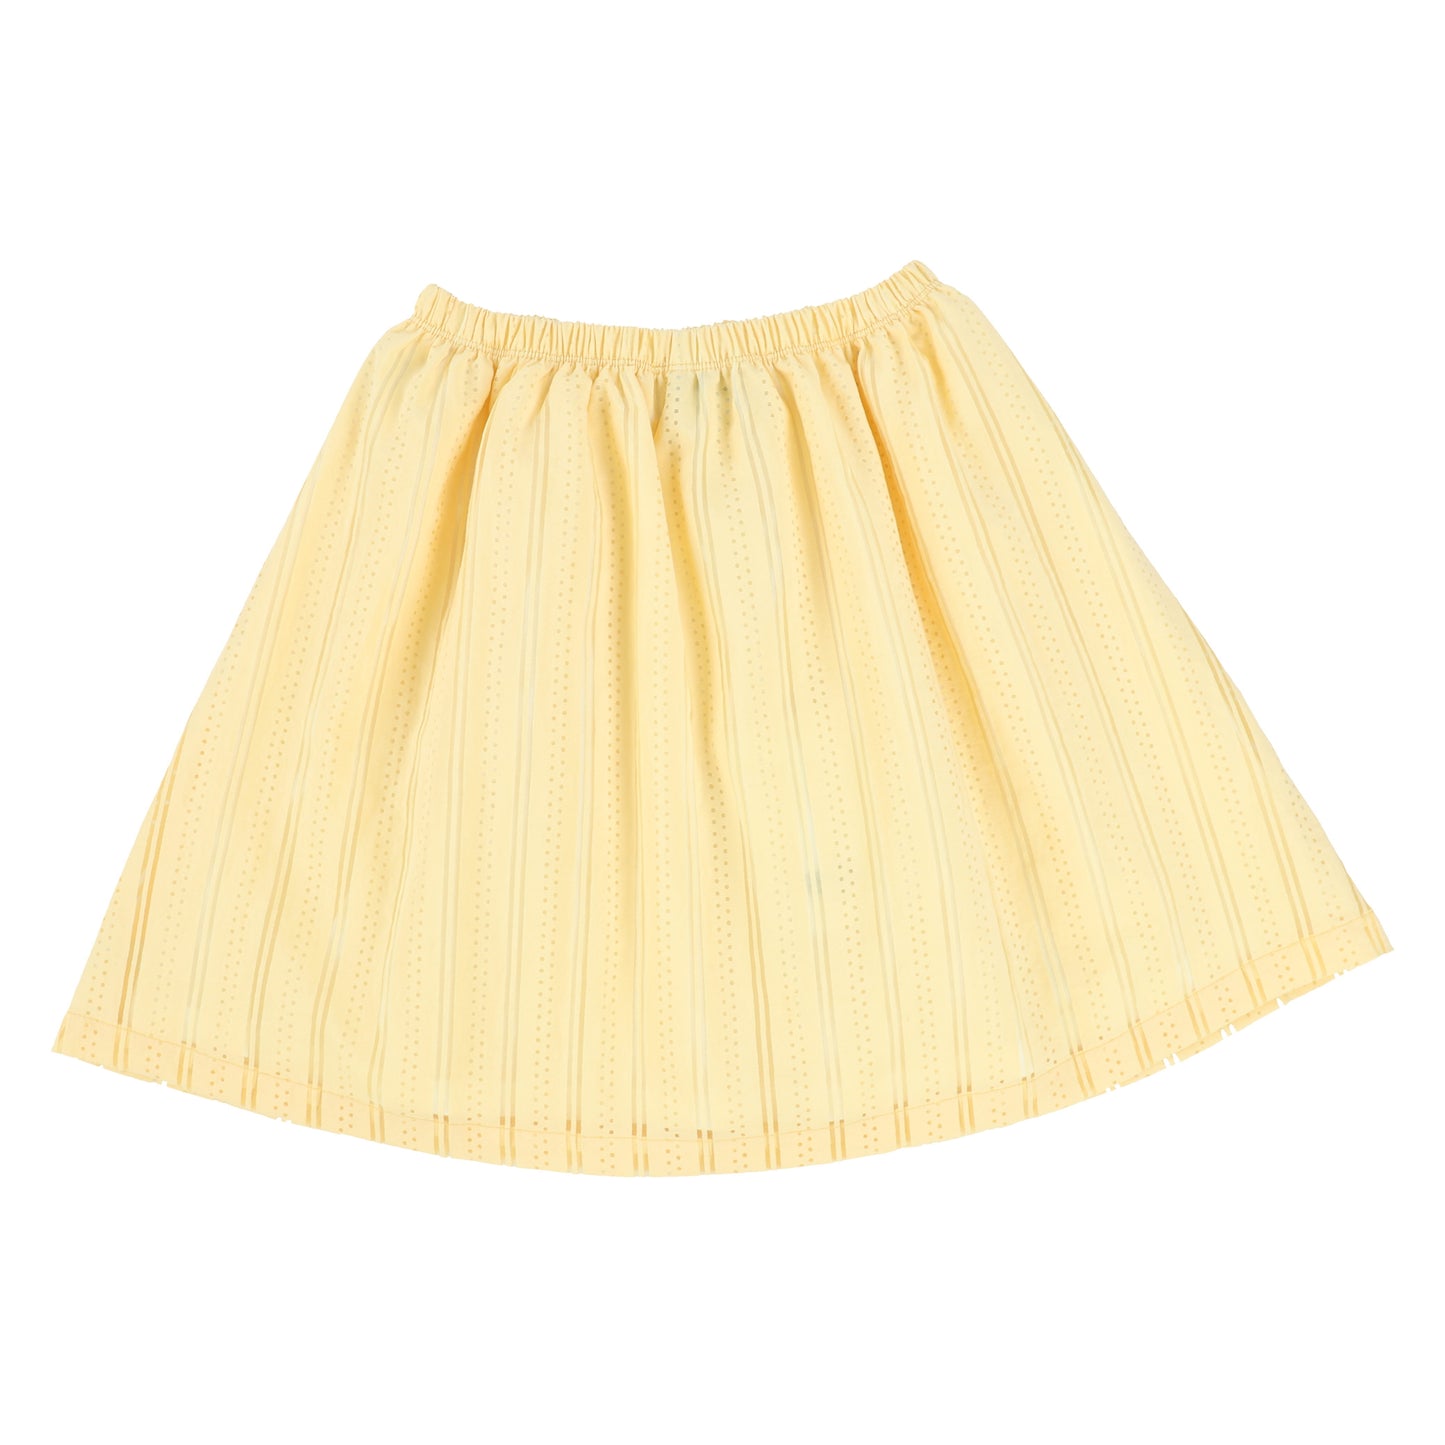 Repose Soft Yellow Striped Flare Skirt [Final Sale]